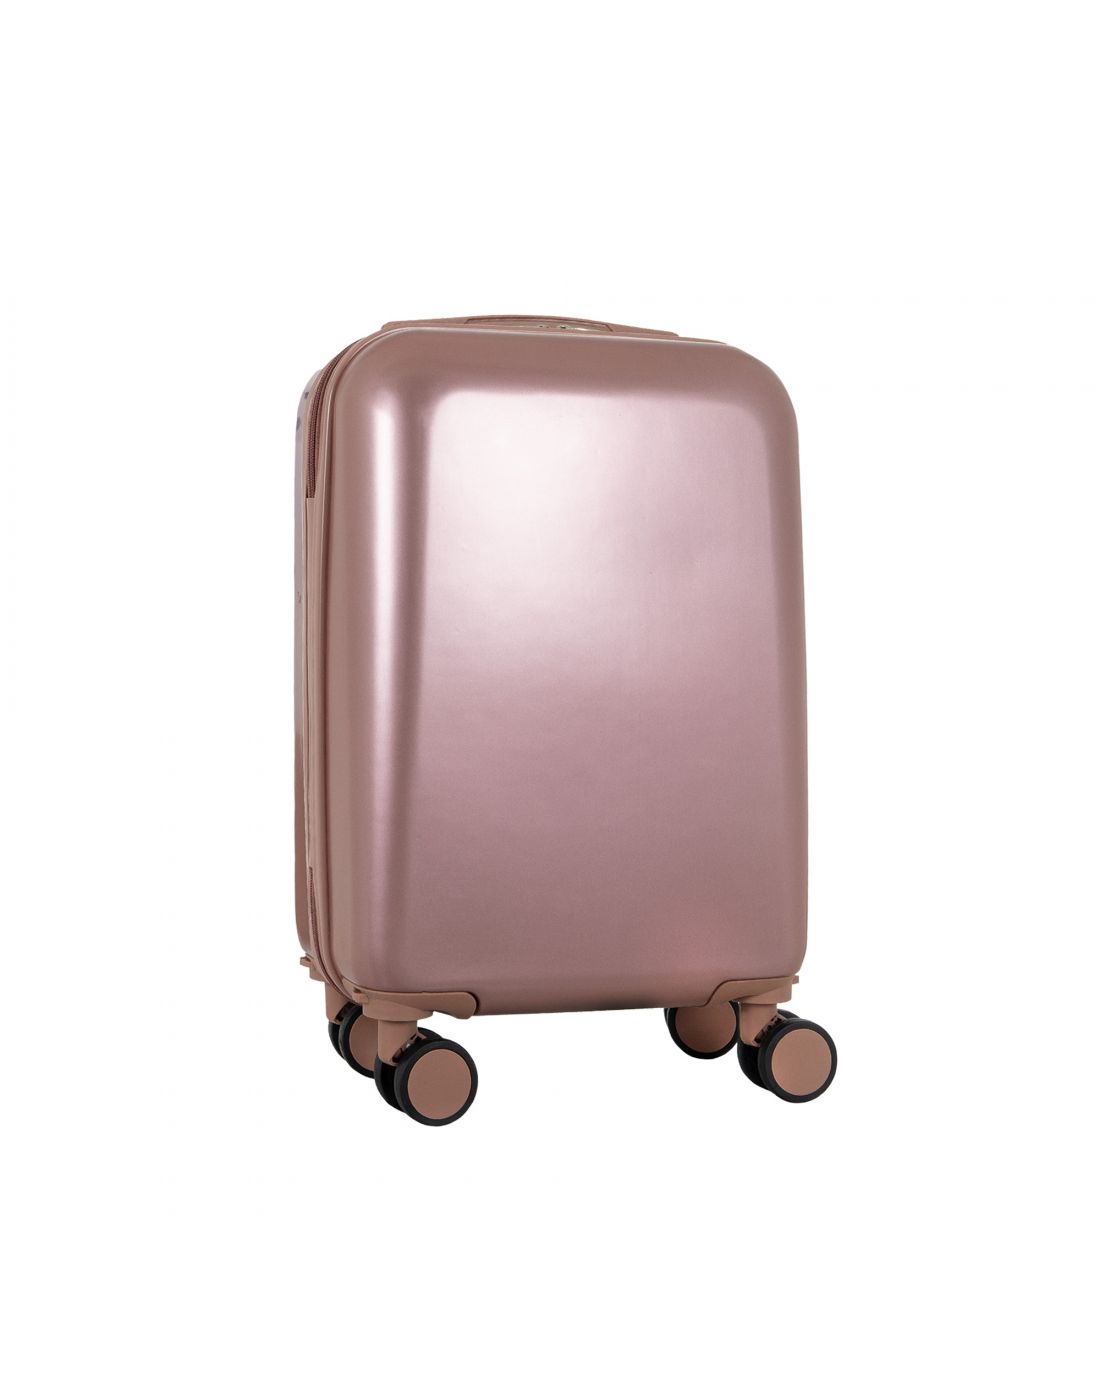 Lapin House Bapteme  Old Pink Suitcase